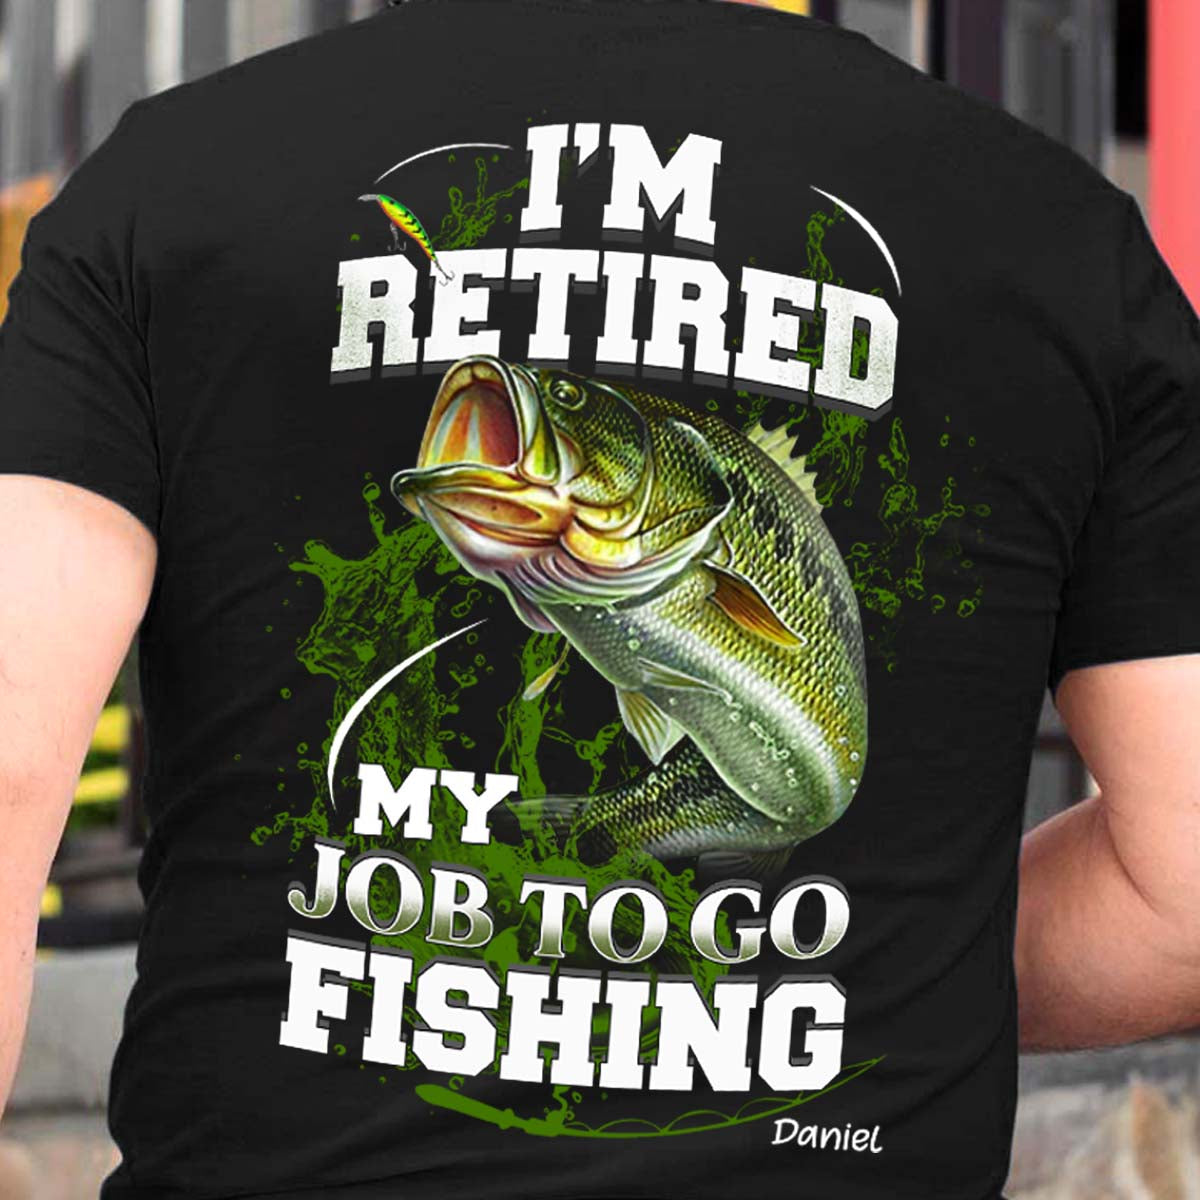 I'm Retired My Job to Go to Fishing - Personalized Back Design Shirt - Retirement M